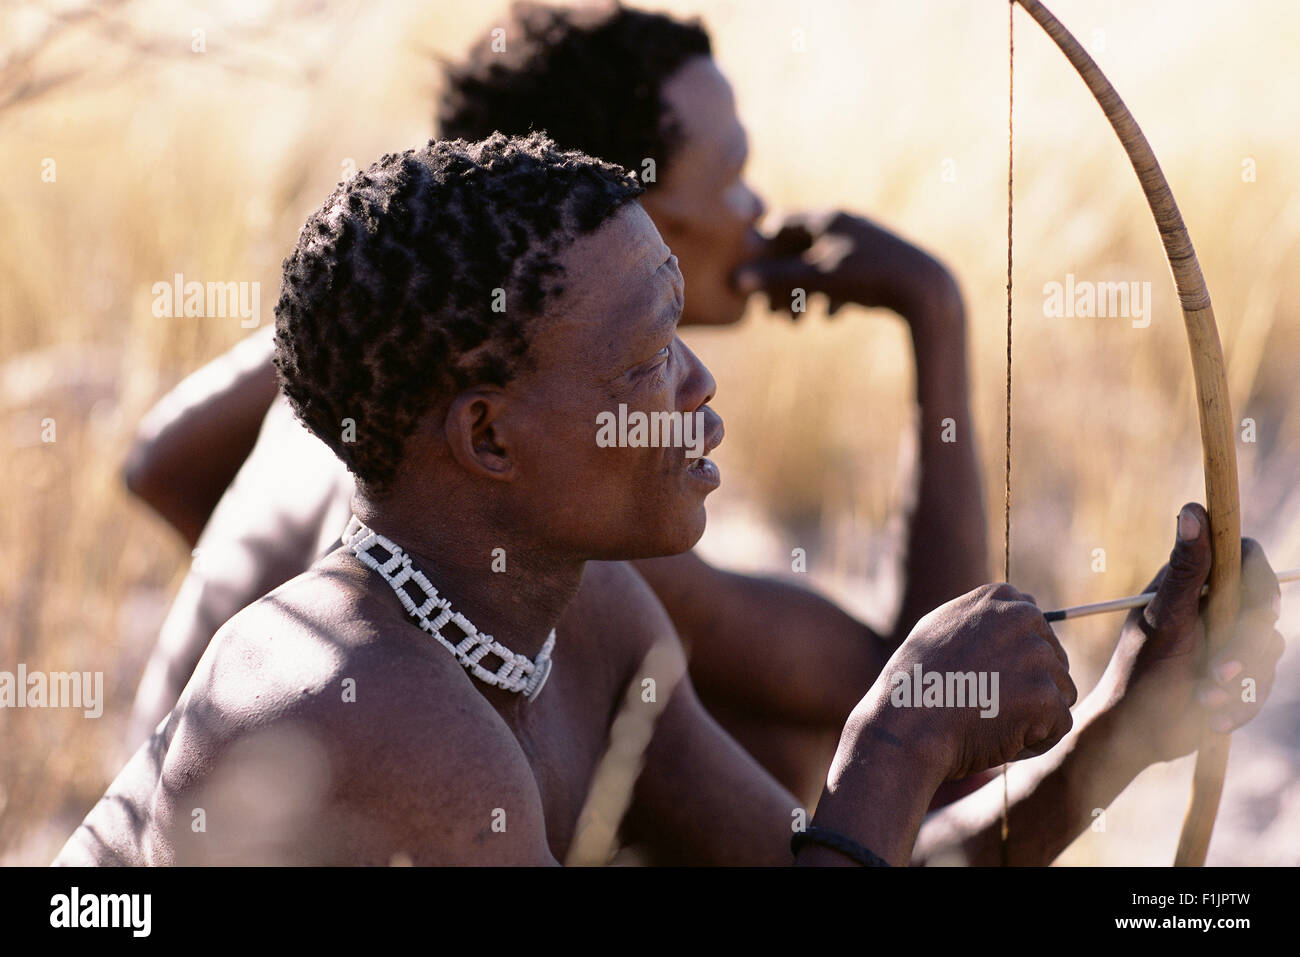 Bushman Hunters with Bow and Arrow, Namibia, Africa Stock Photo